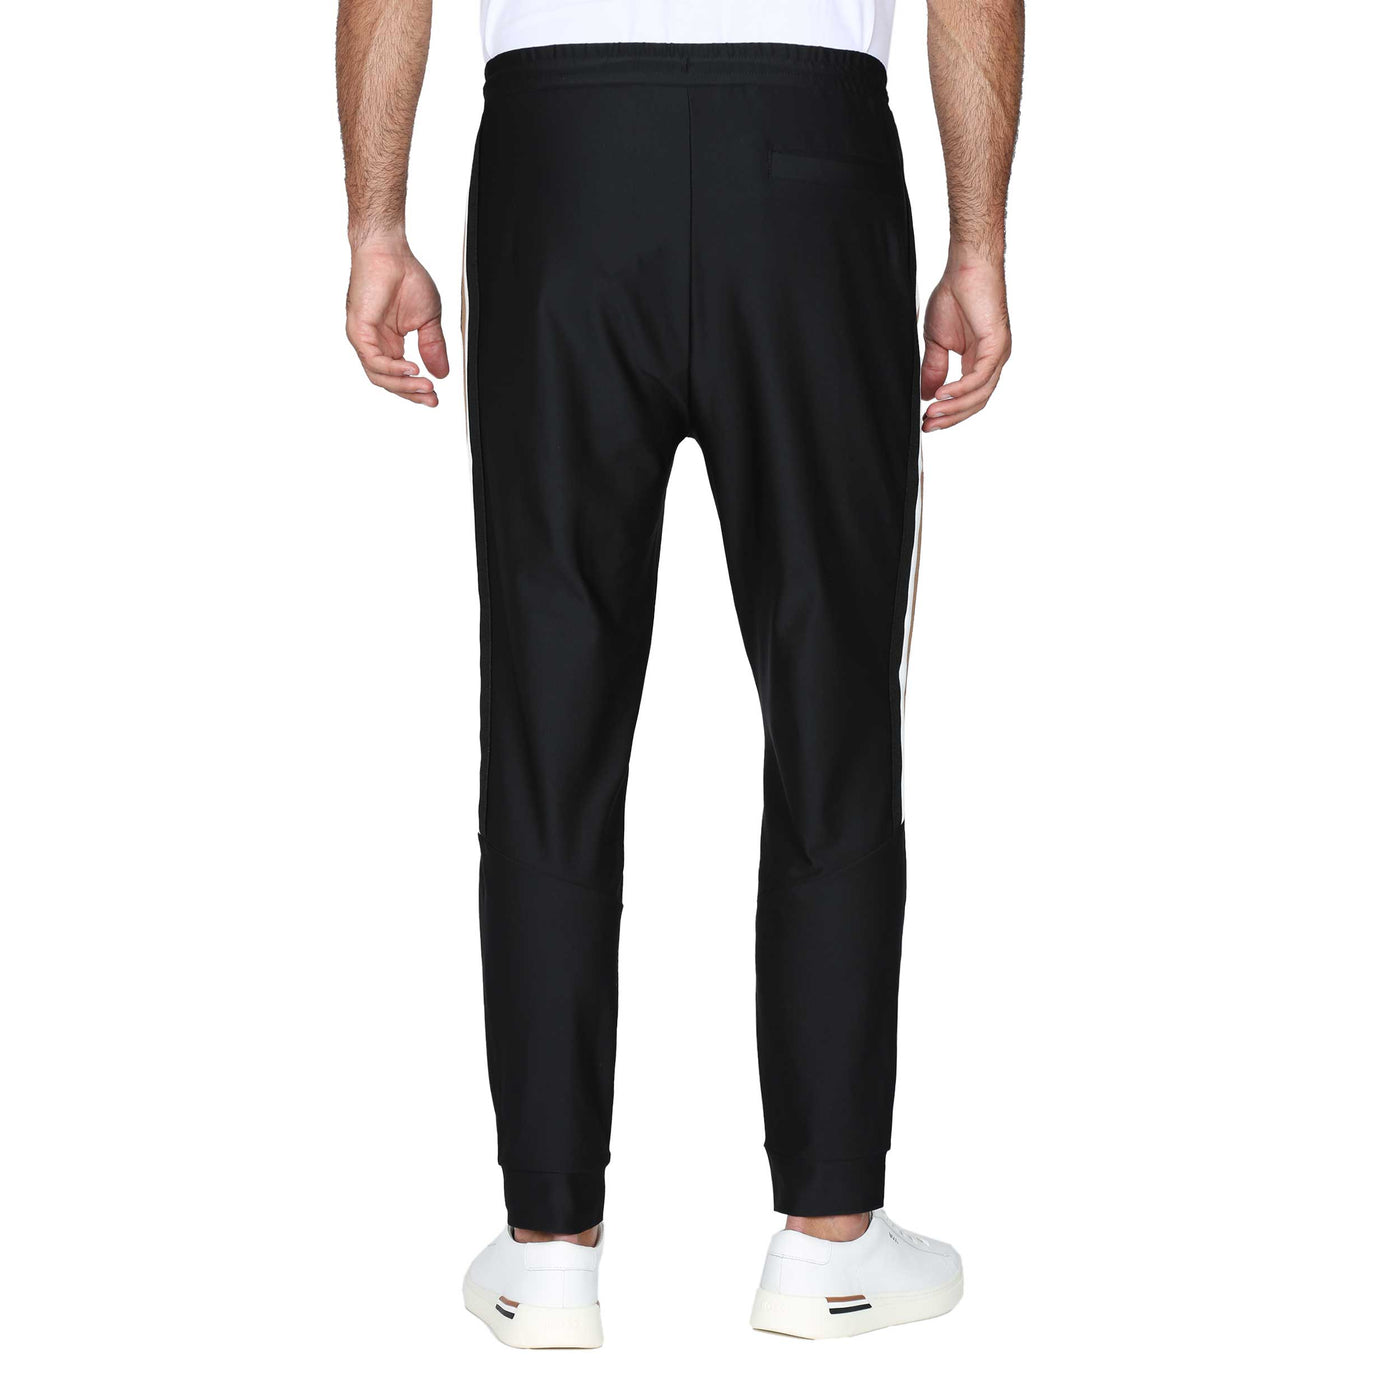 BOSS Hicon MB 1 Sweat Pant in Black Back